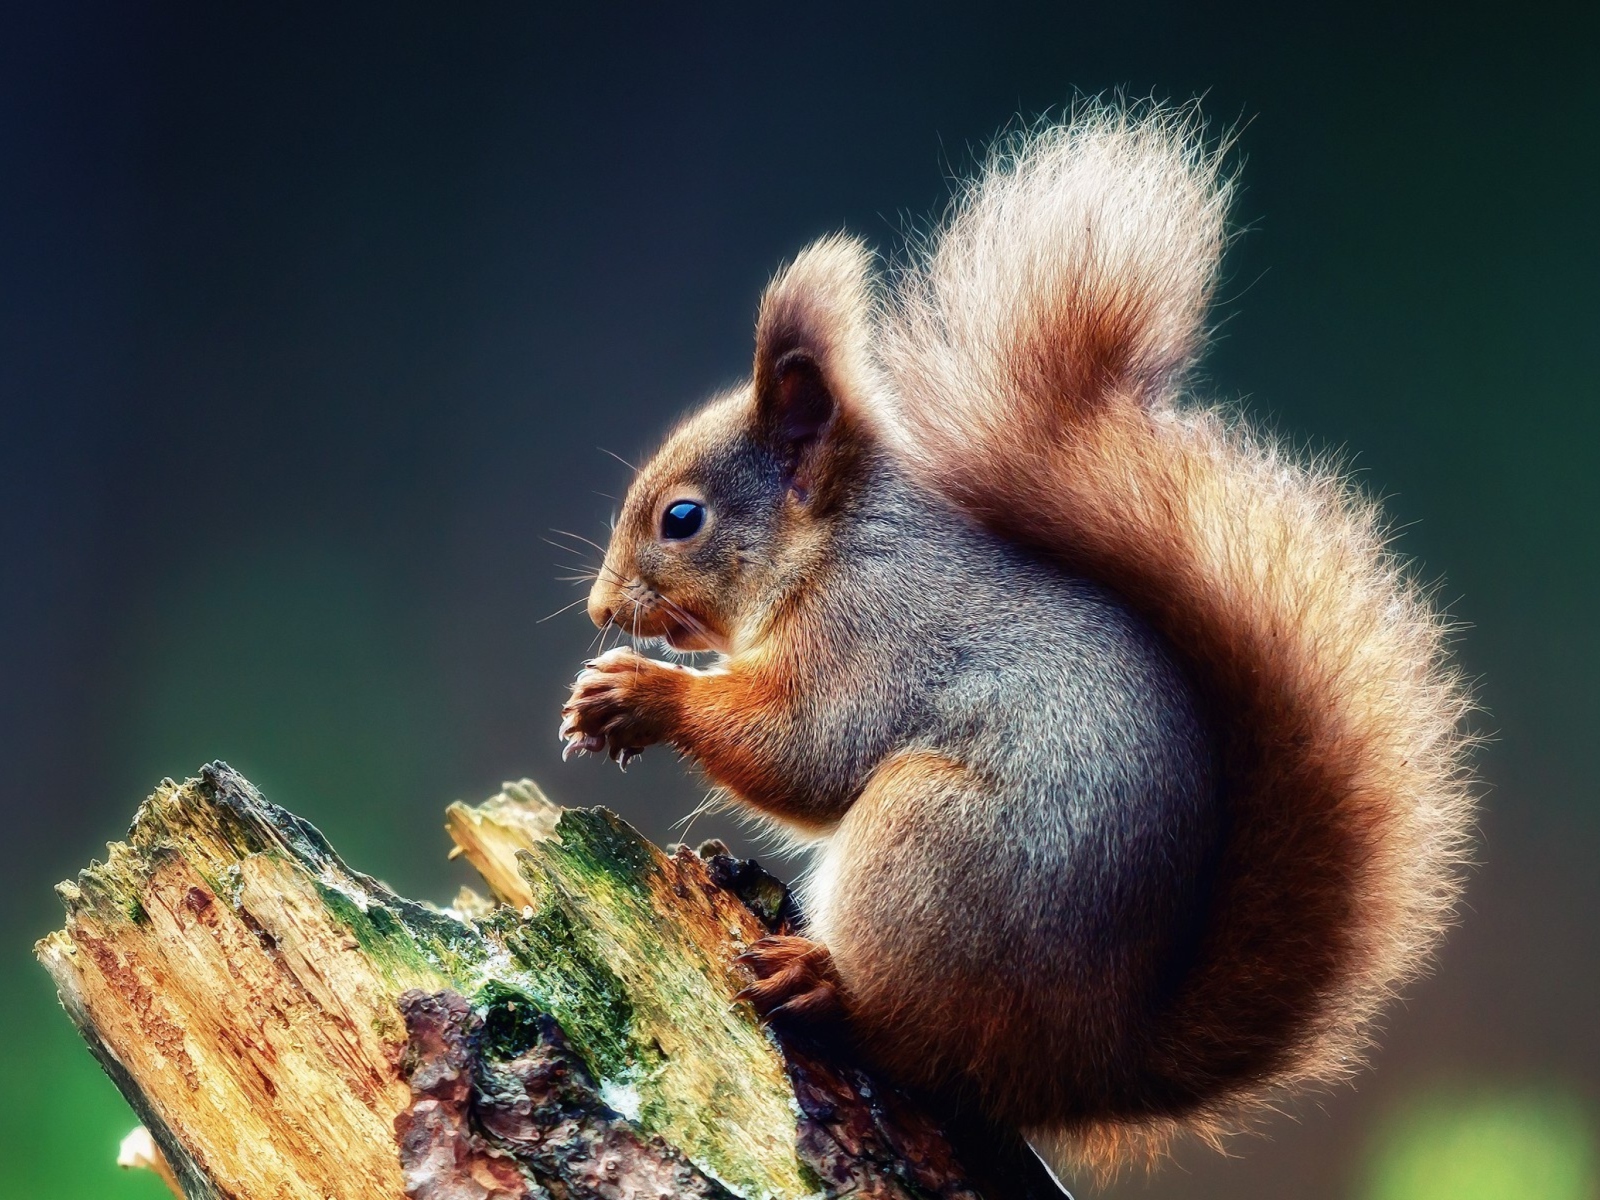 Squirrel Eating A Nut wallpaper 1600x1200